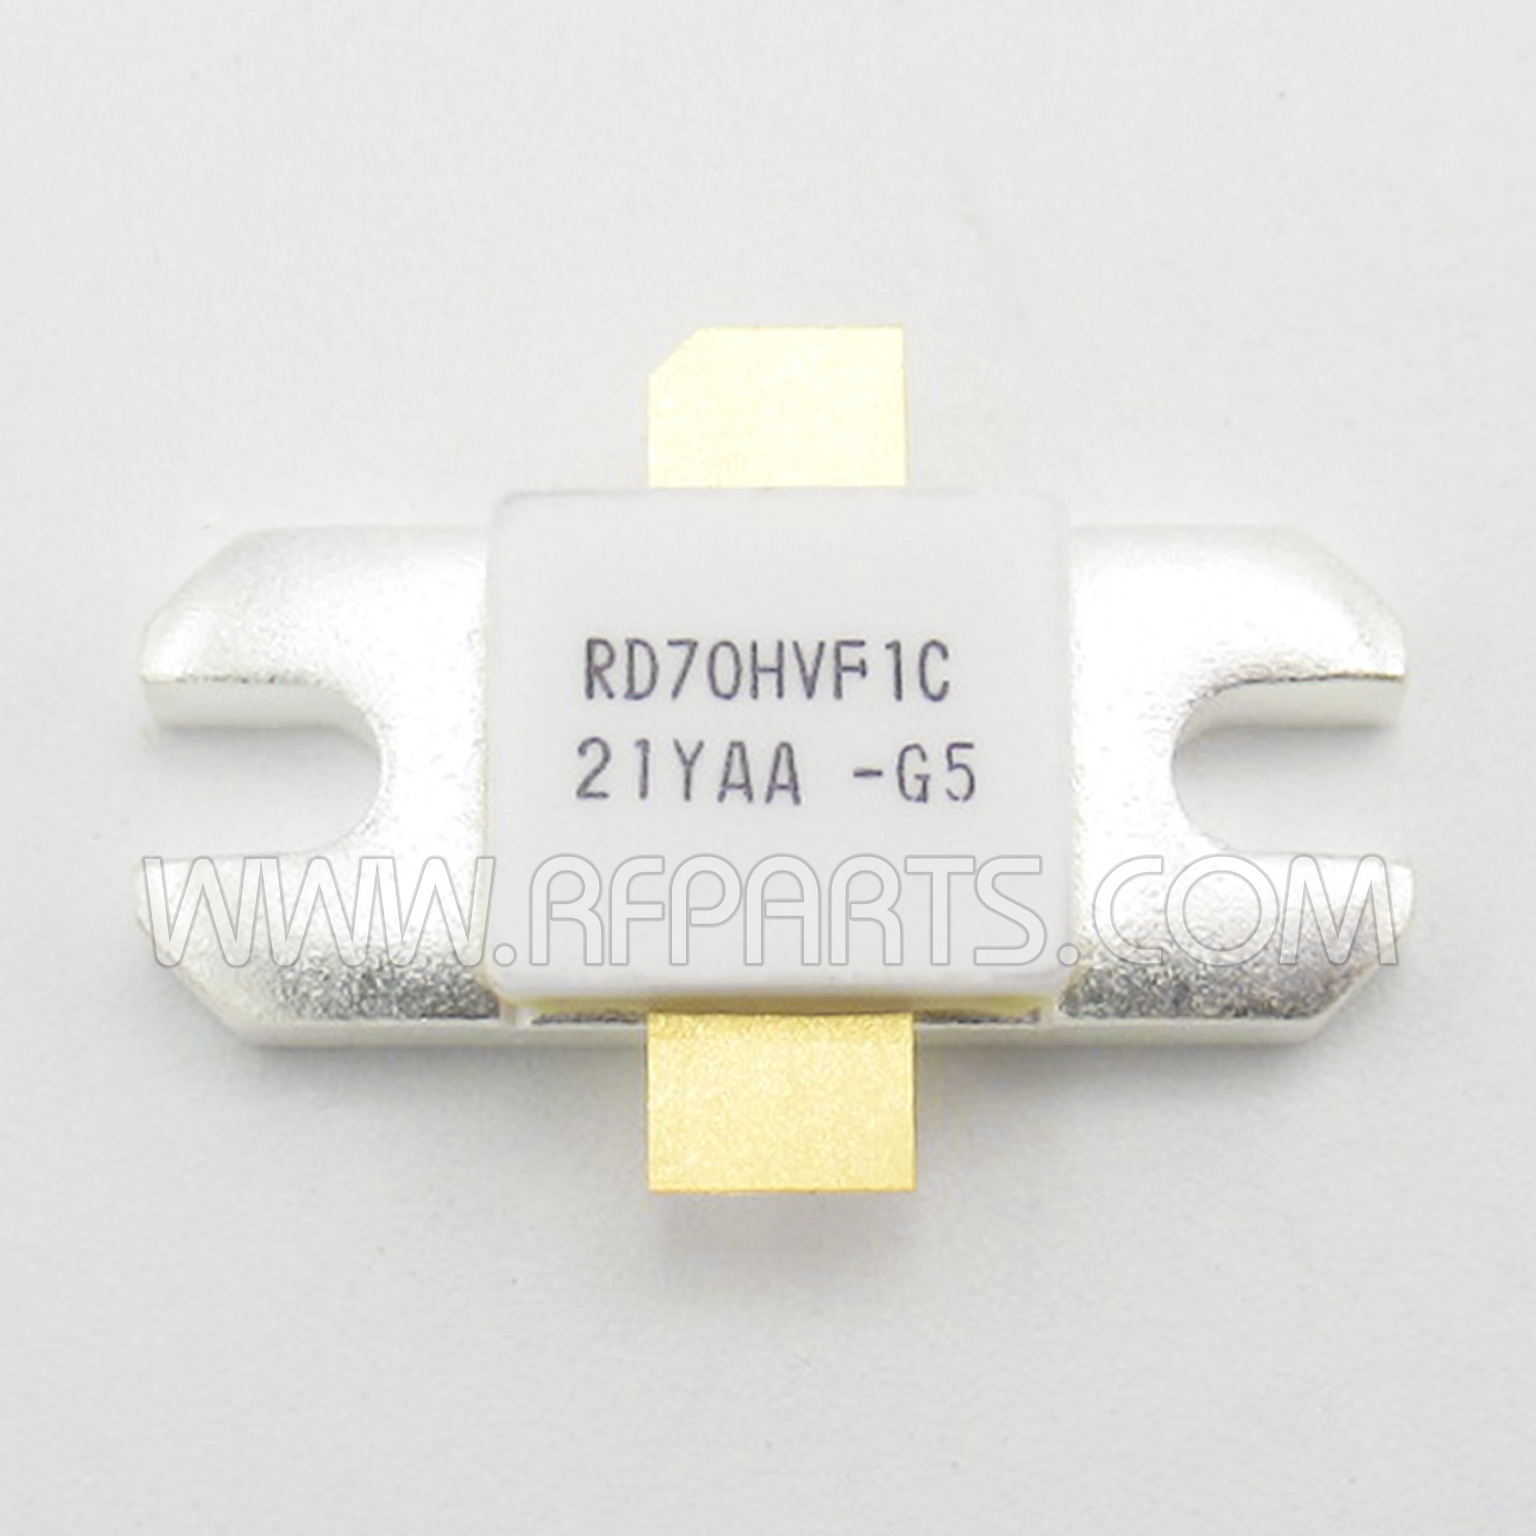 RD70HVF1C-501 Mitsubishi Silicon MOSFET Power Transistor 175MHz